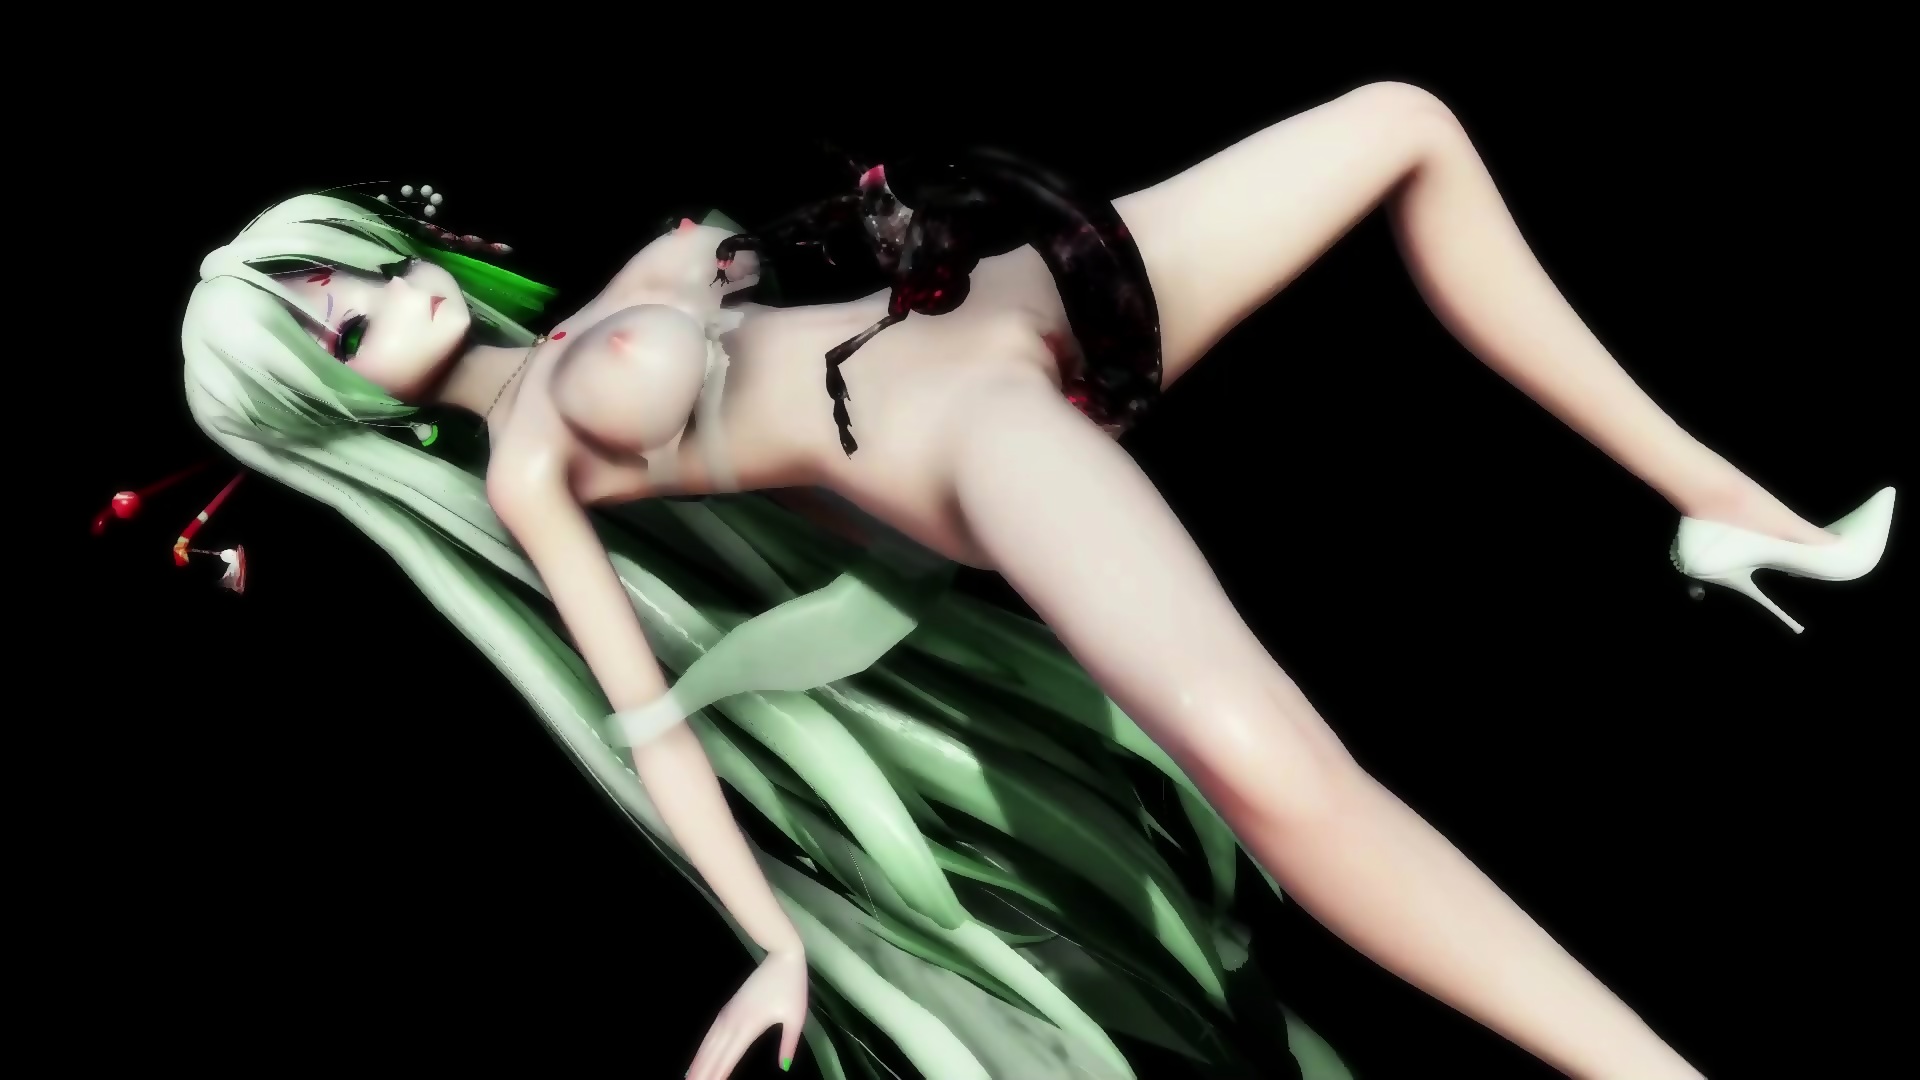 ...Watch Mmd3d Insect 3d Mmd Porn Spankbang,Mmd Sex Insect Lovers Submitted...